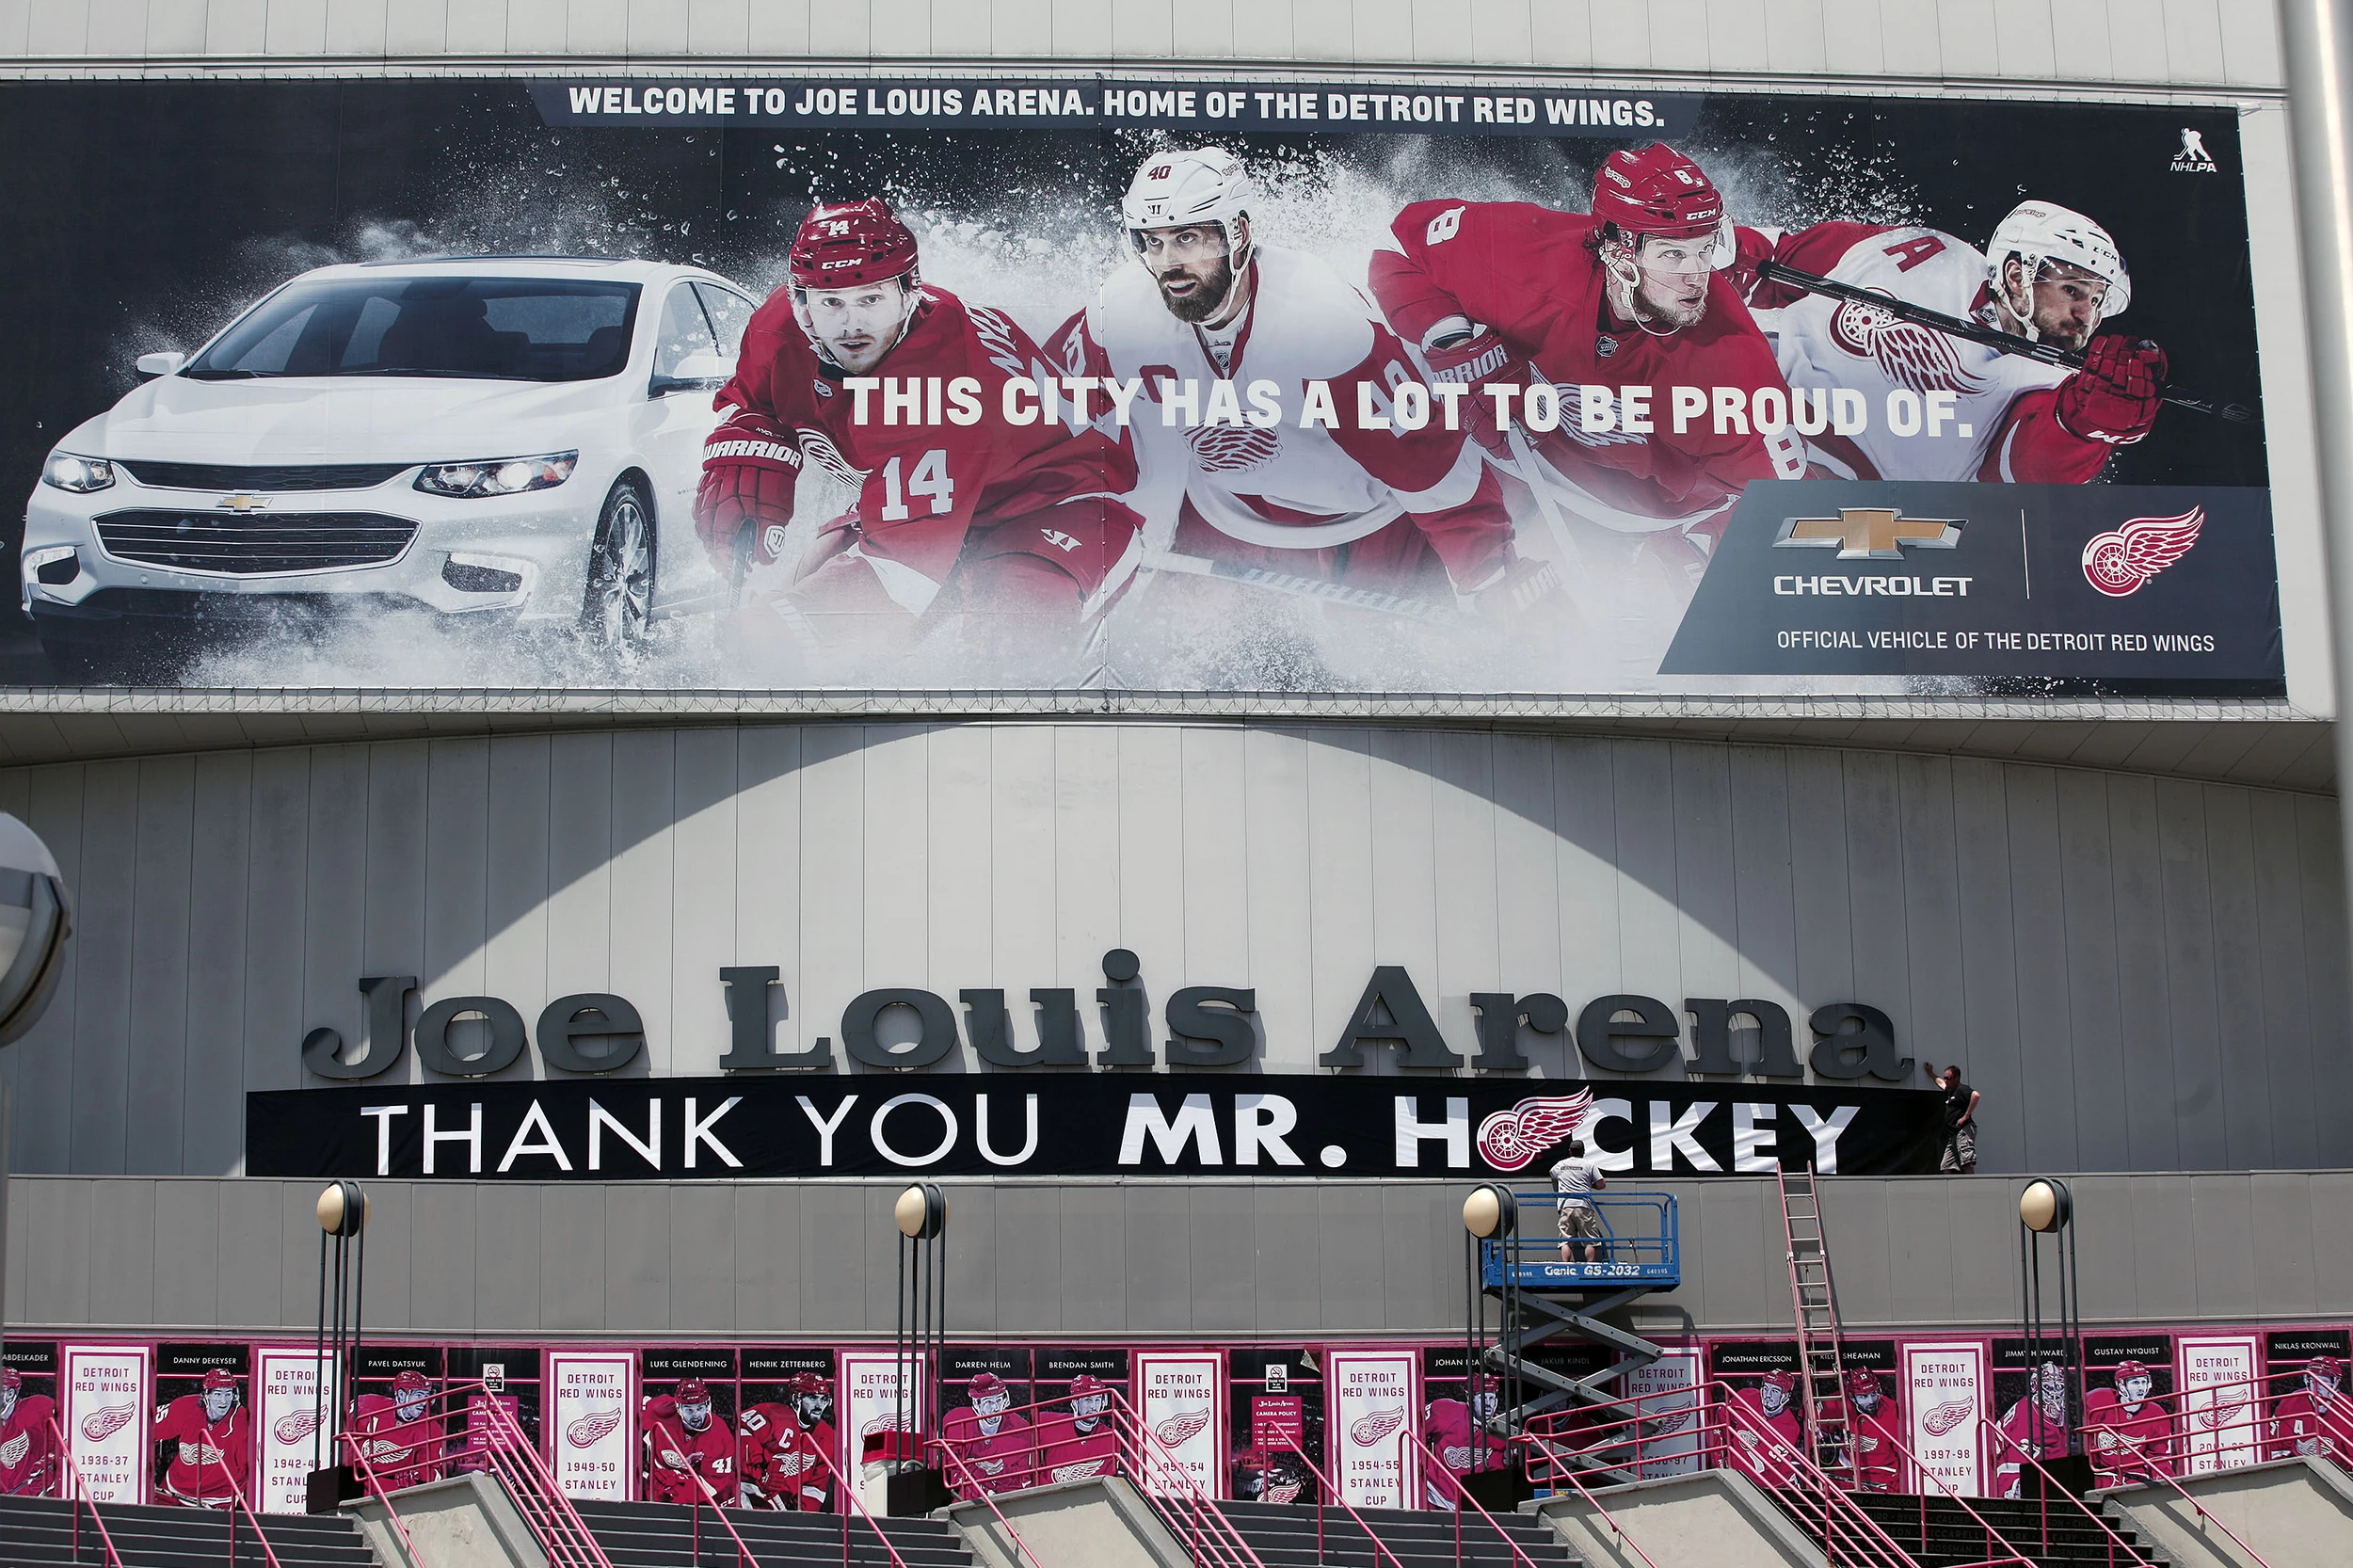 Joe Louis Arena Seats Are Now On Sale - WDET 101.9 FM